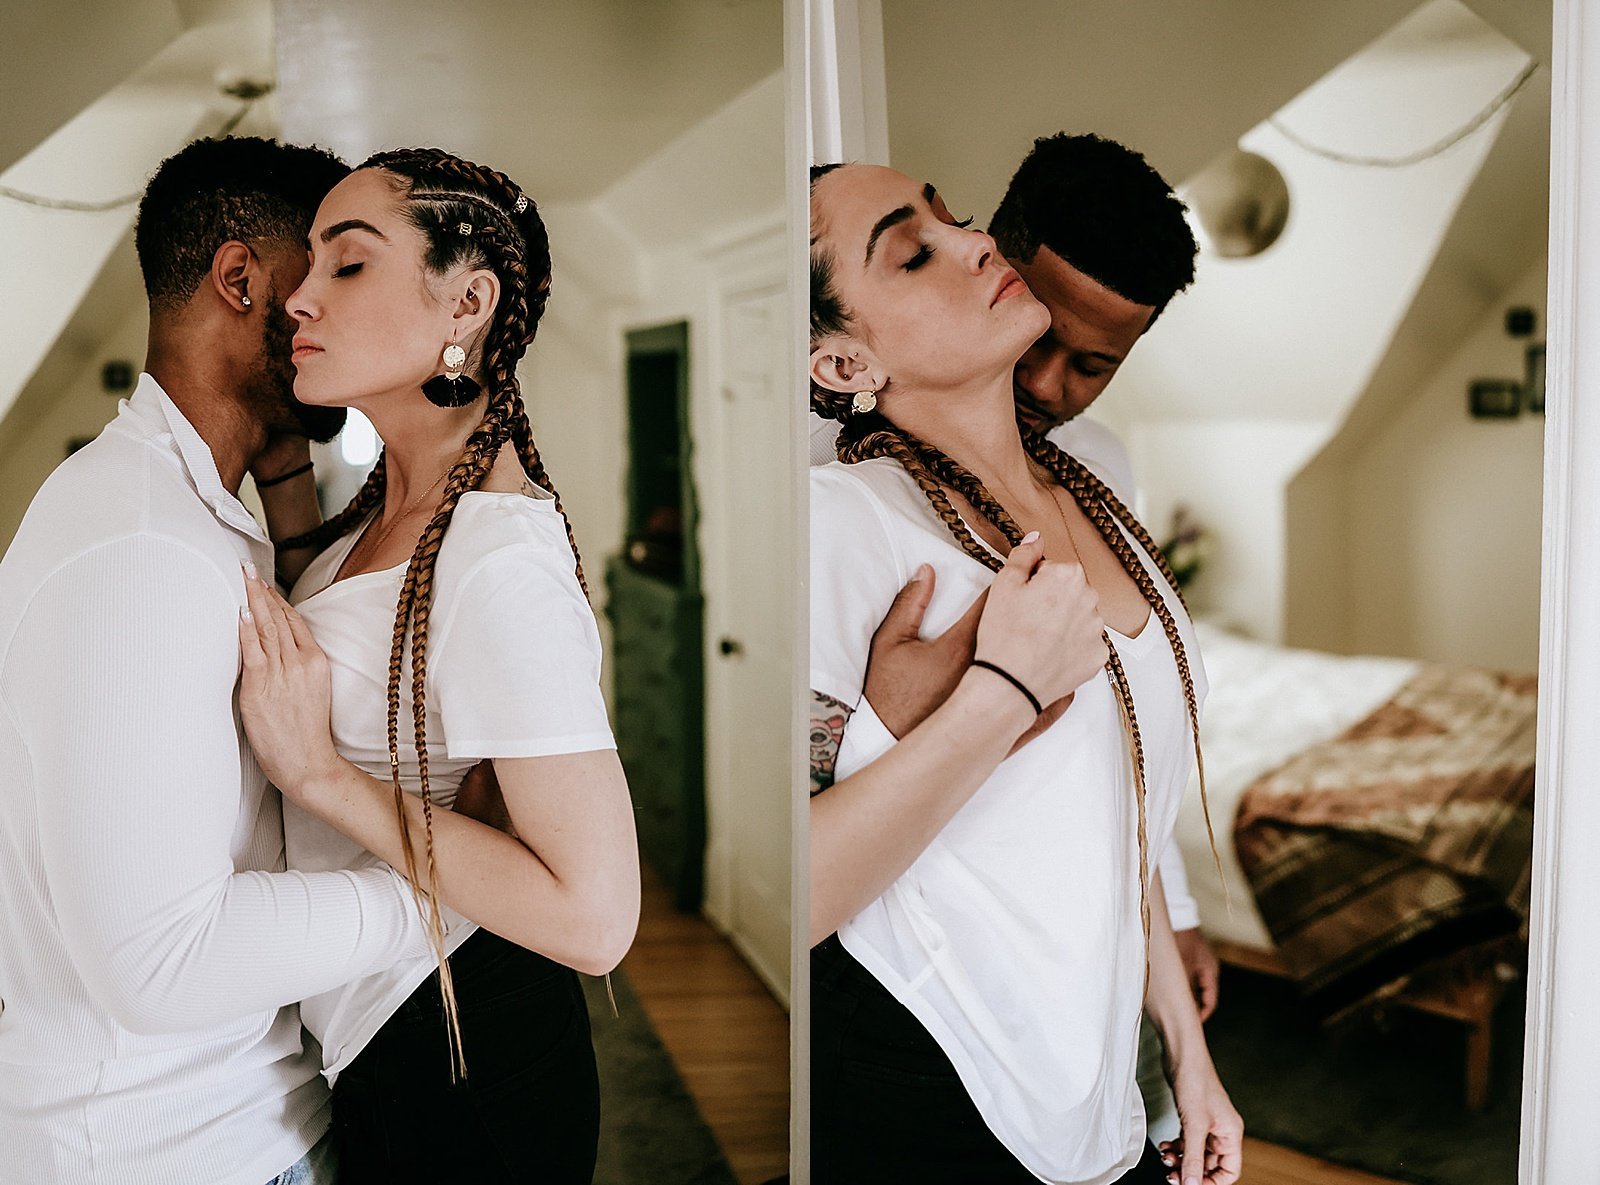  Man kissing woman’s neck for their steamy couples session 